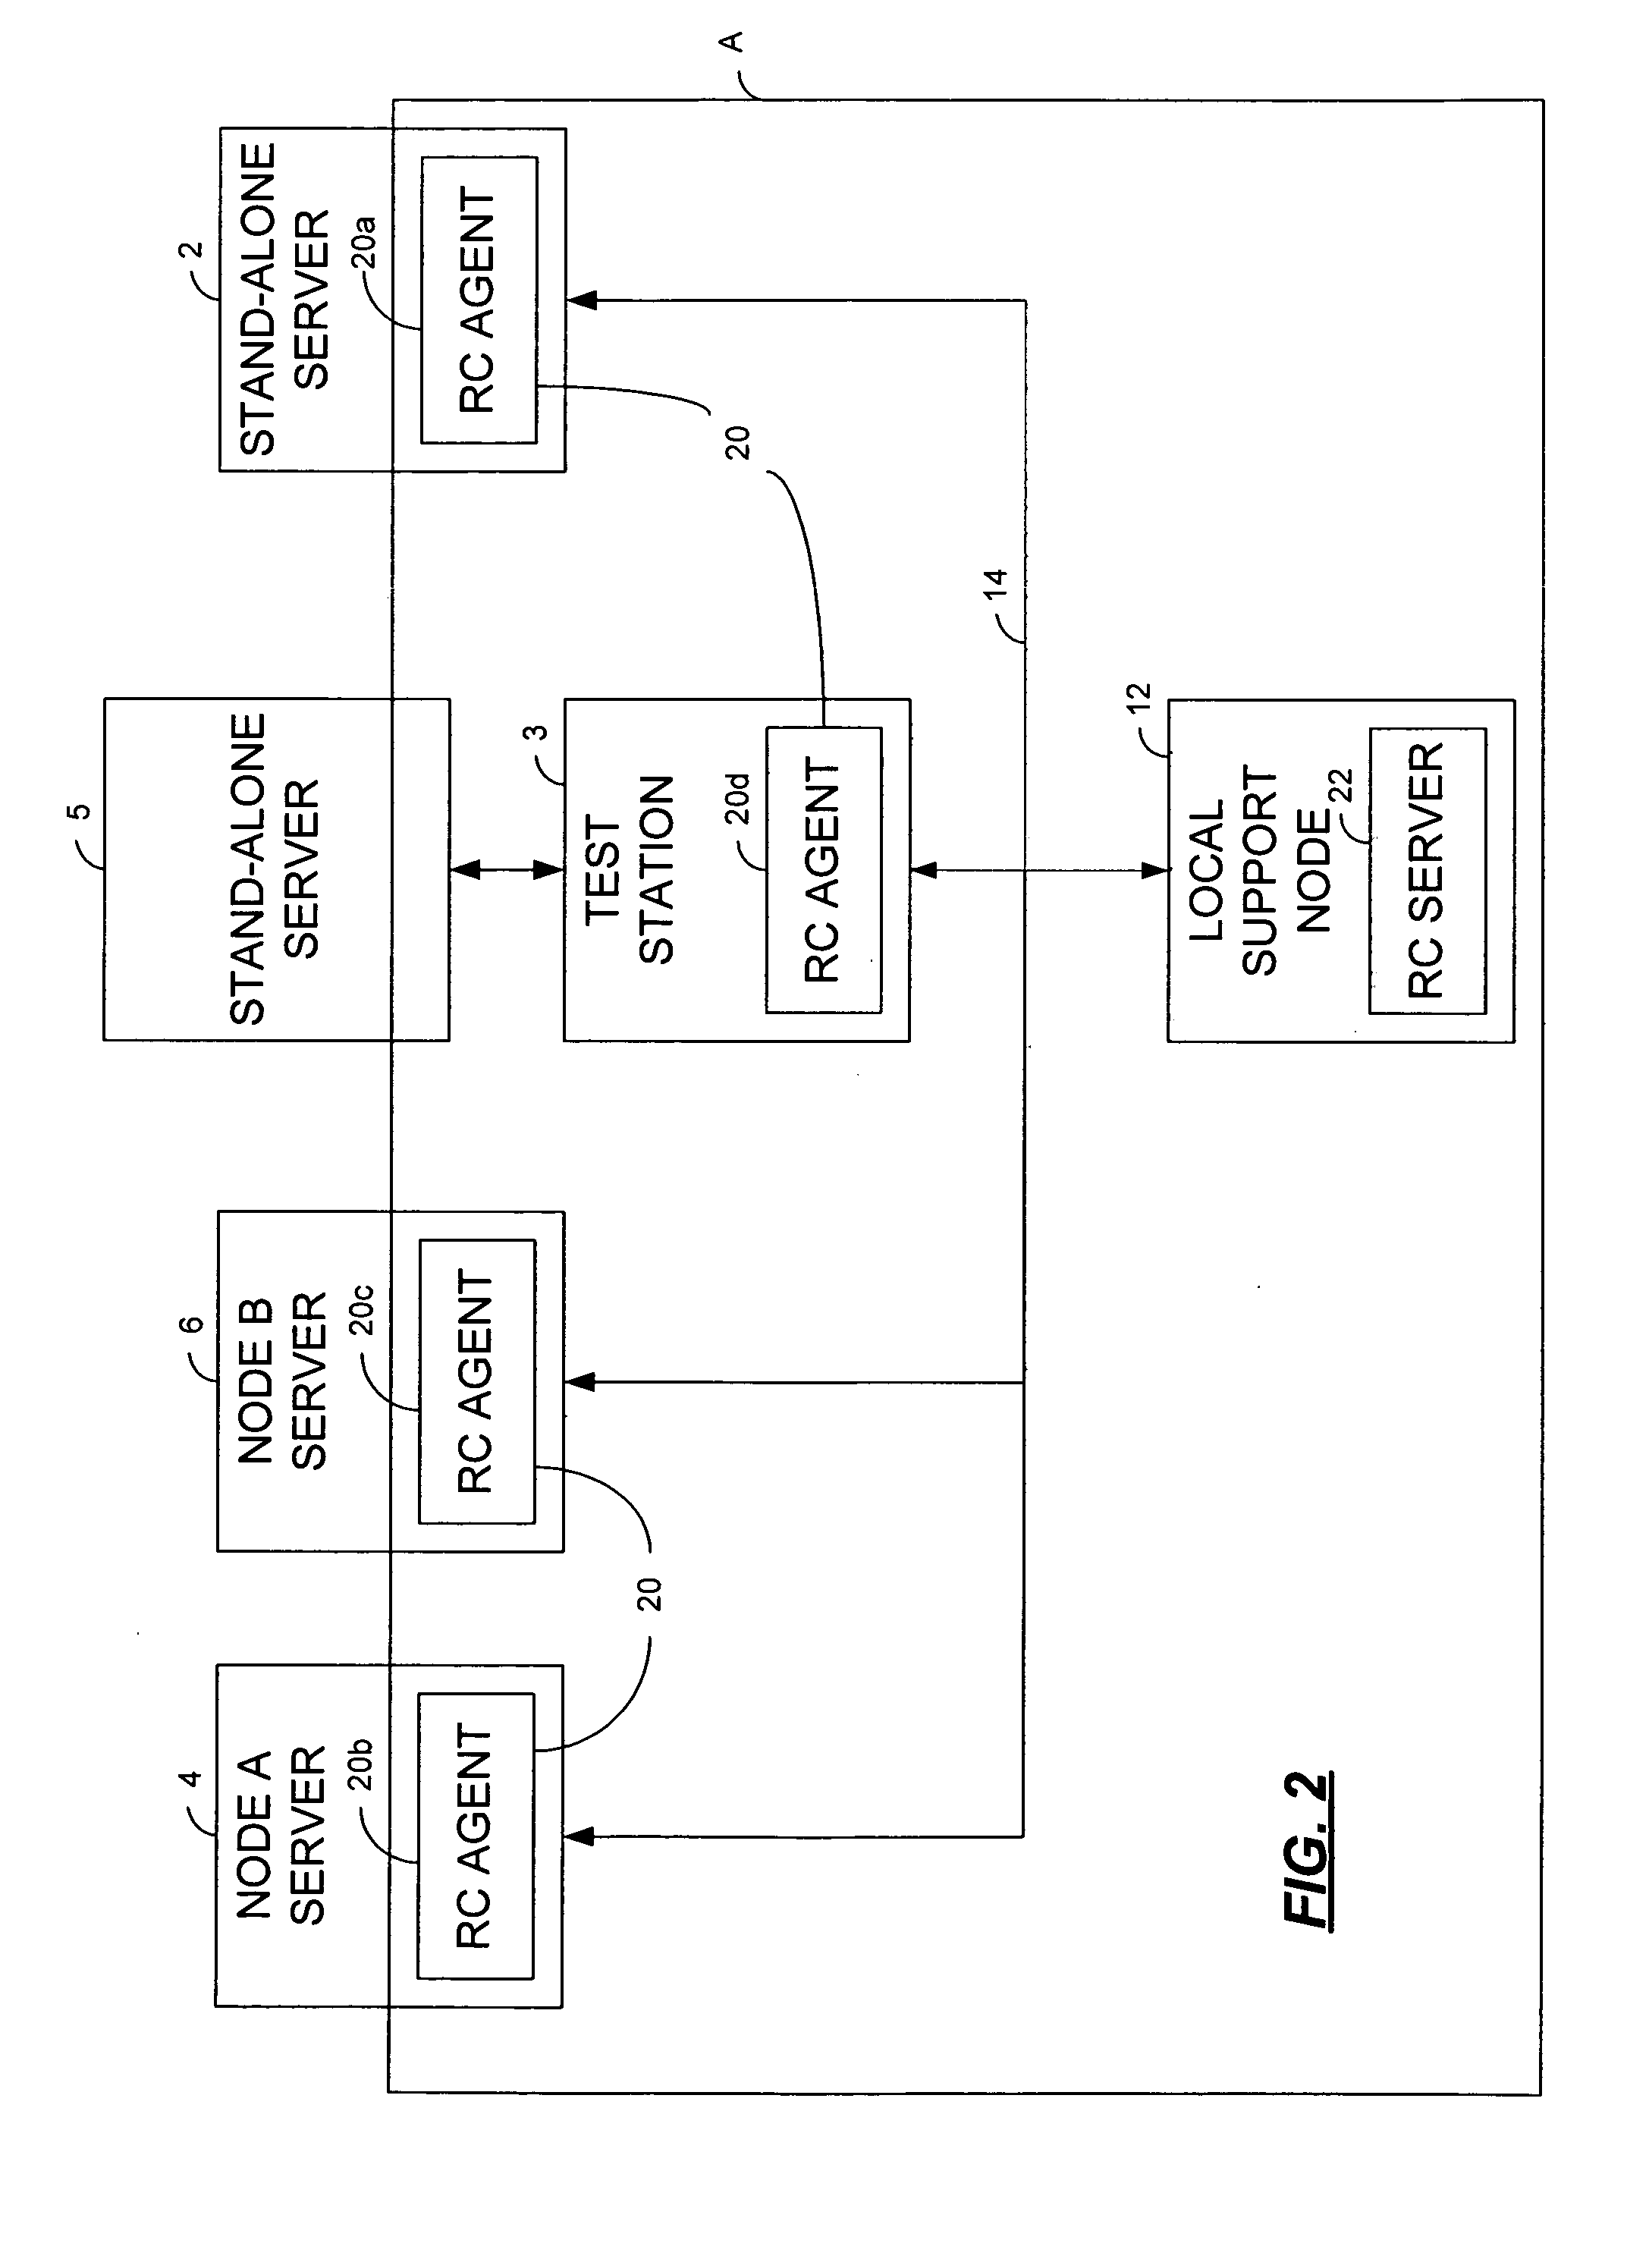 Method and apparatus for automating the root cause analysis of system failures